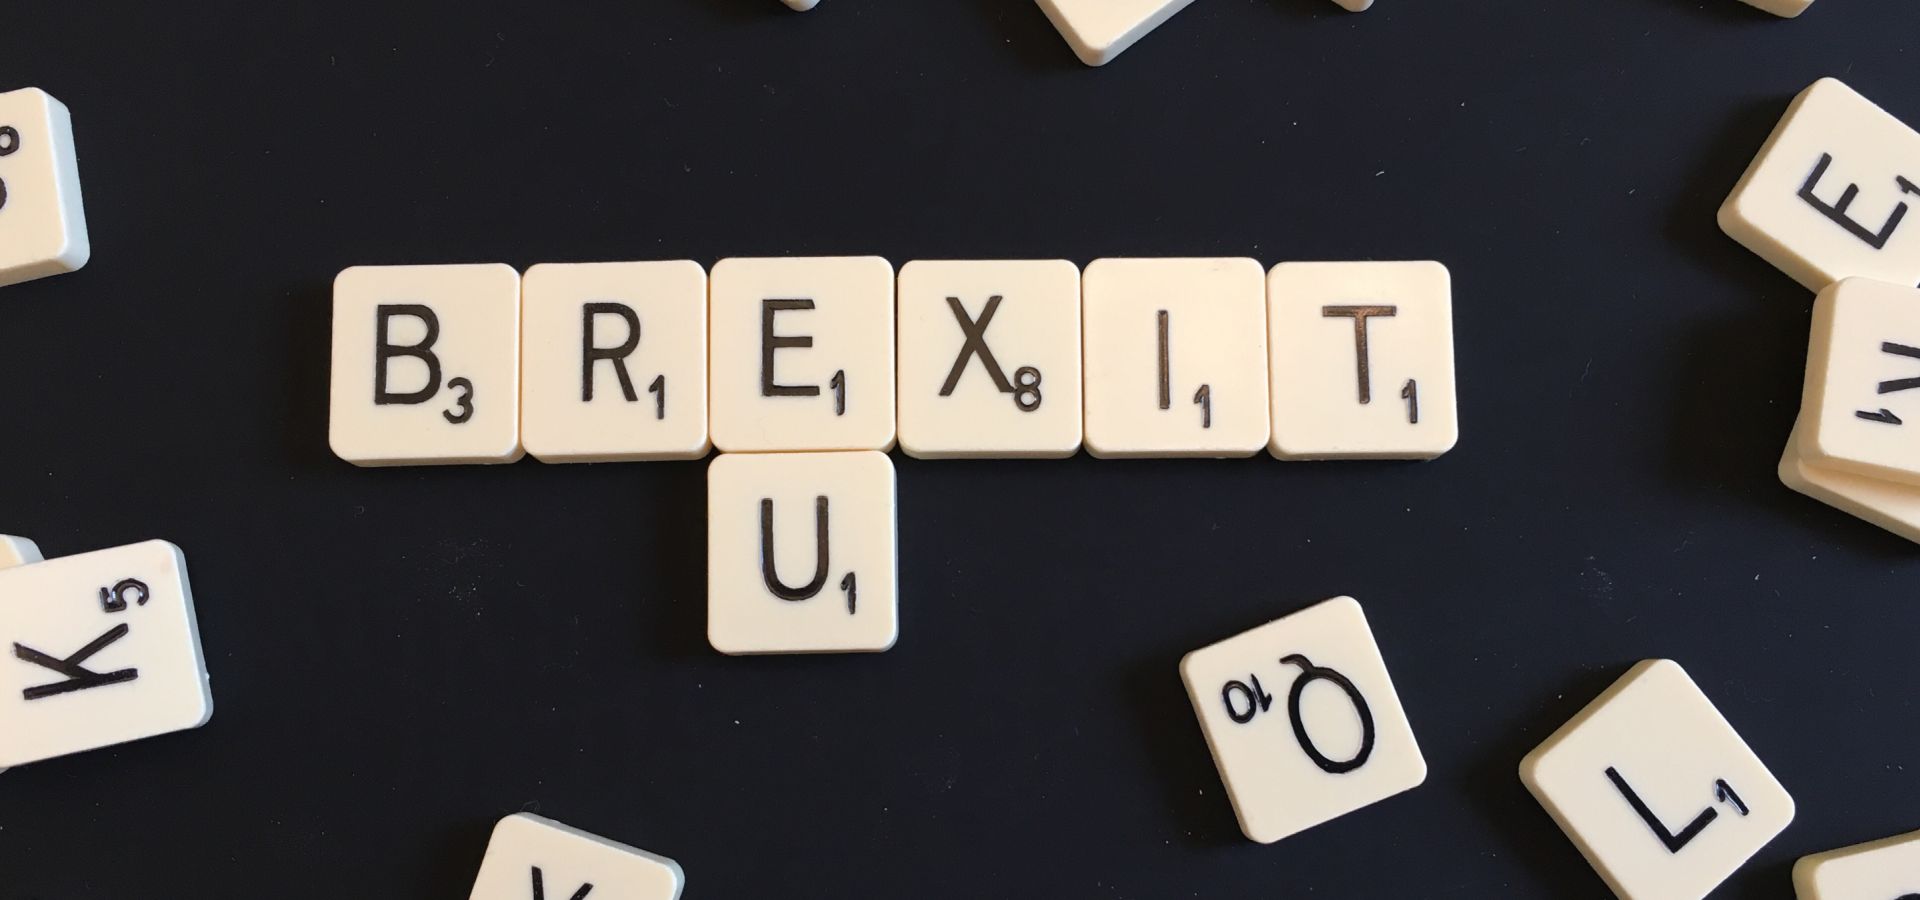 scrabble text with the words brexit and EU spelled out on a black background